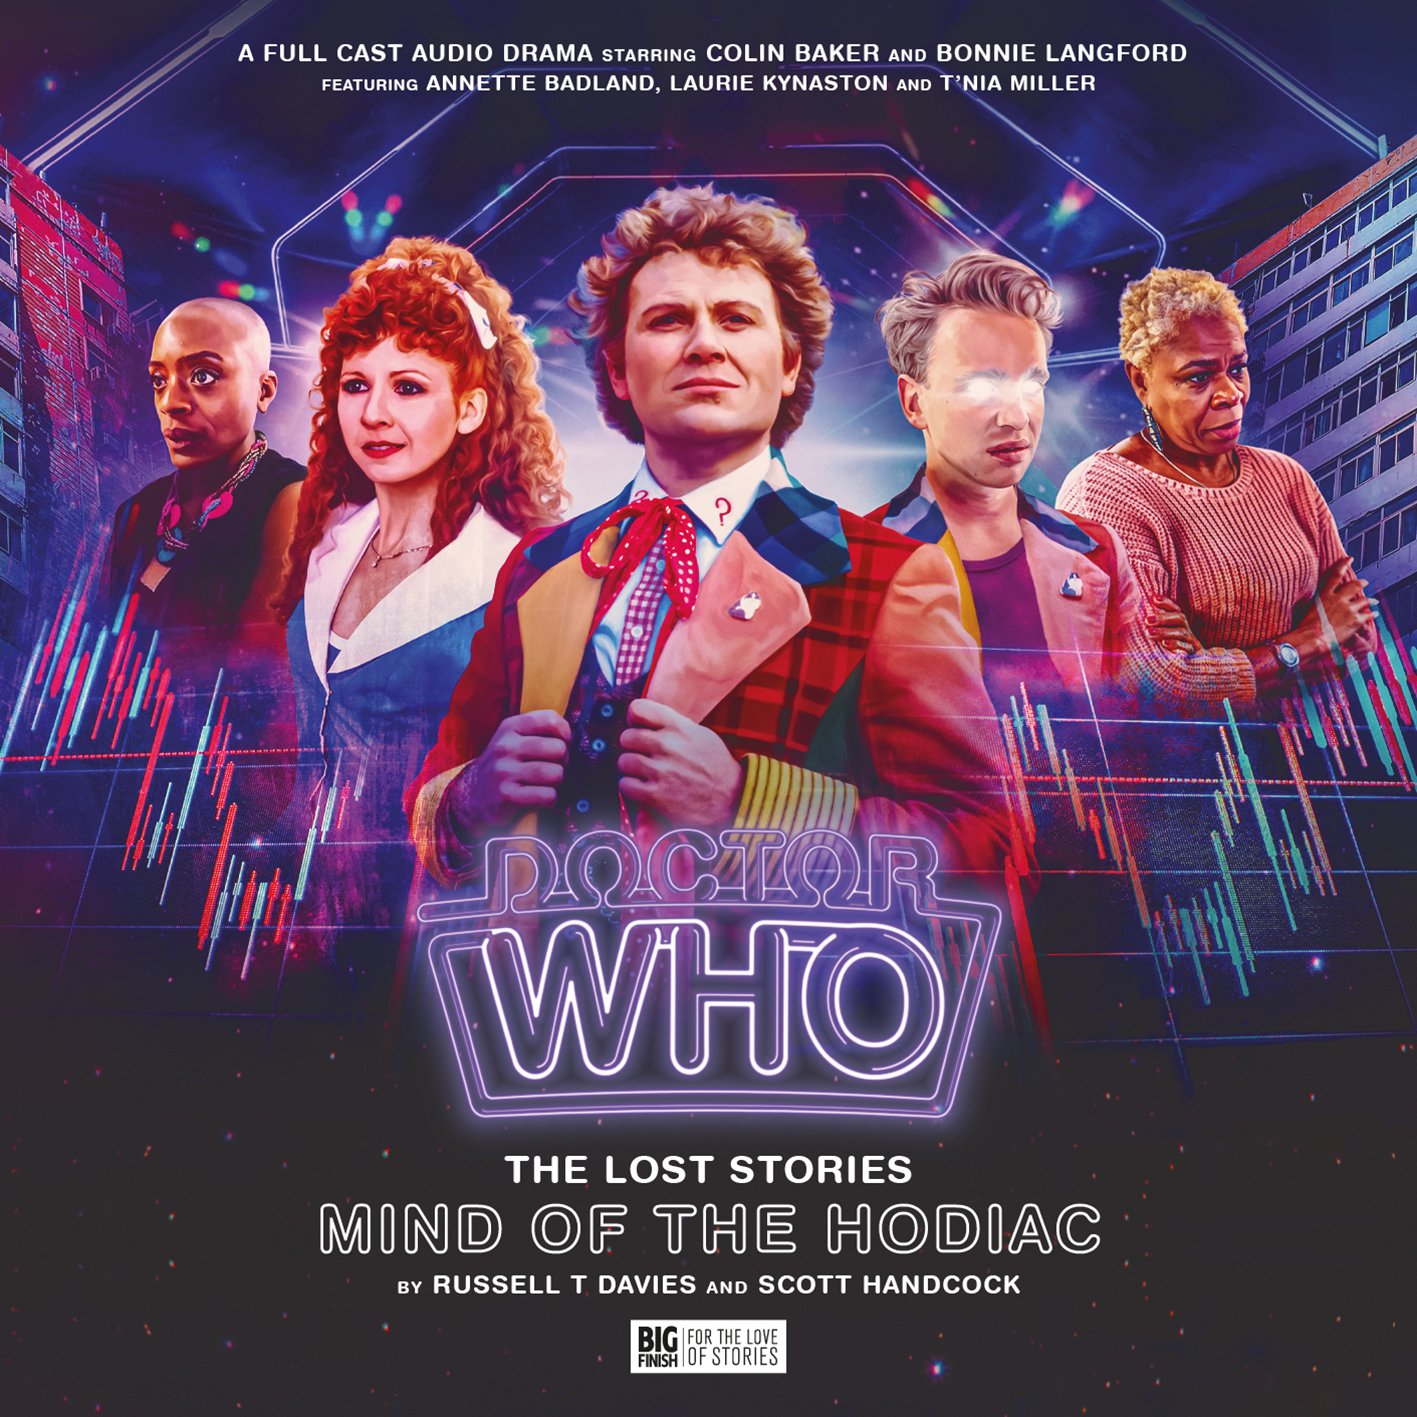 Out Now: Big Finish’s Mind of the Hodiac, the First Doctor Who Script by Russell T Davies